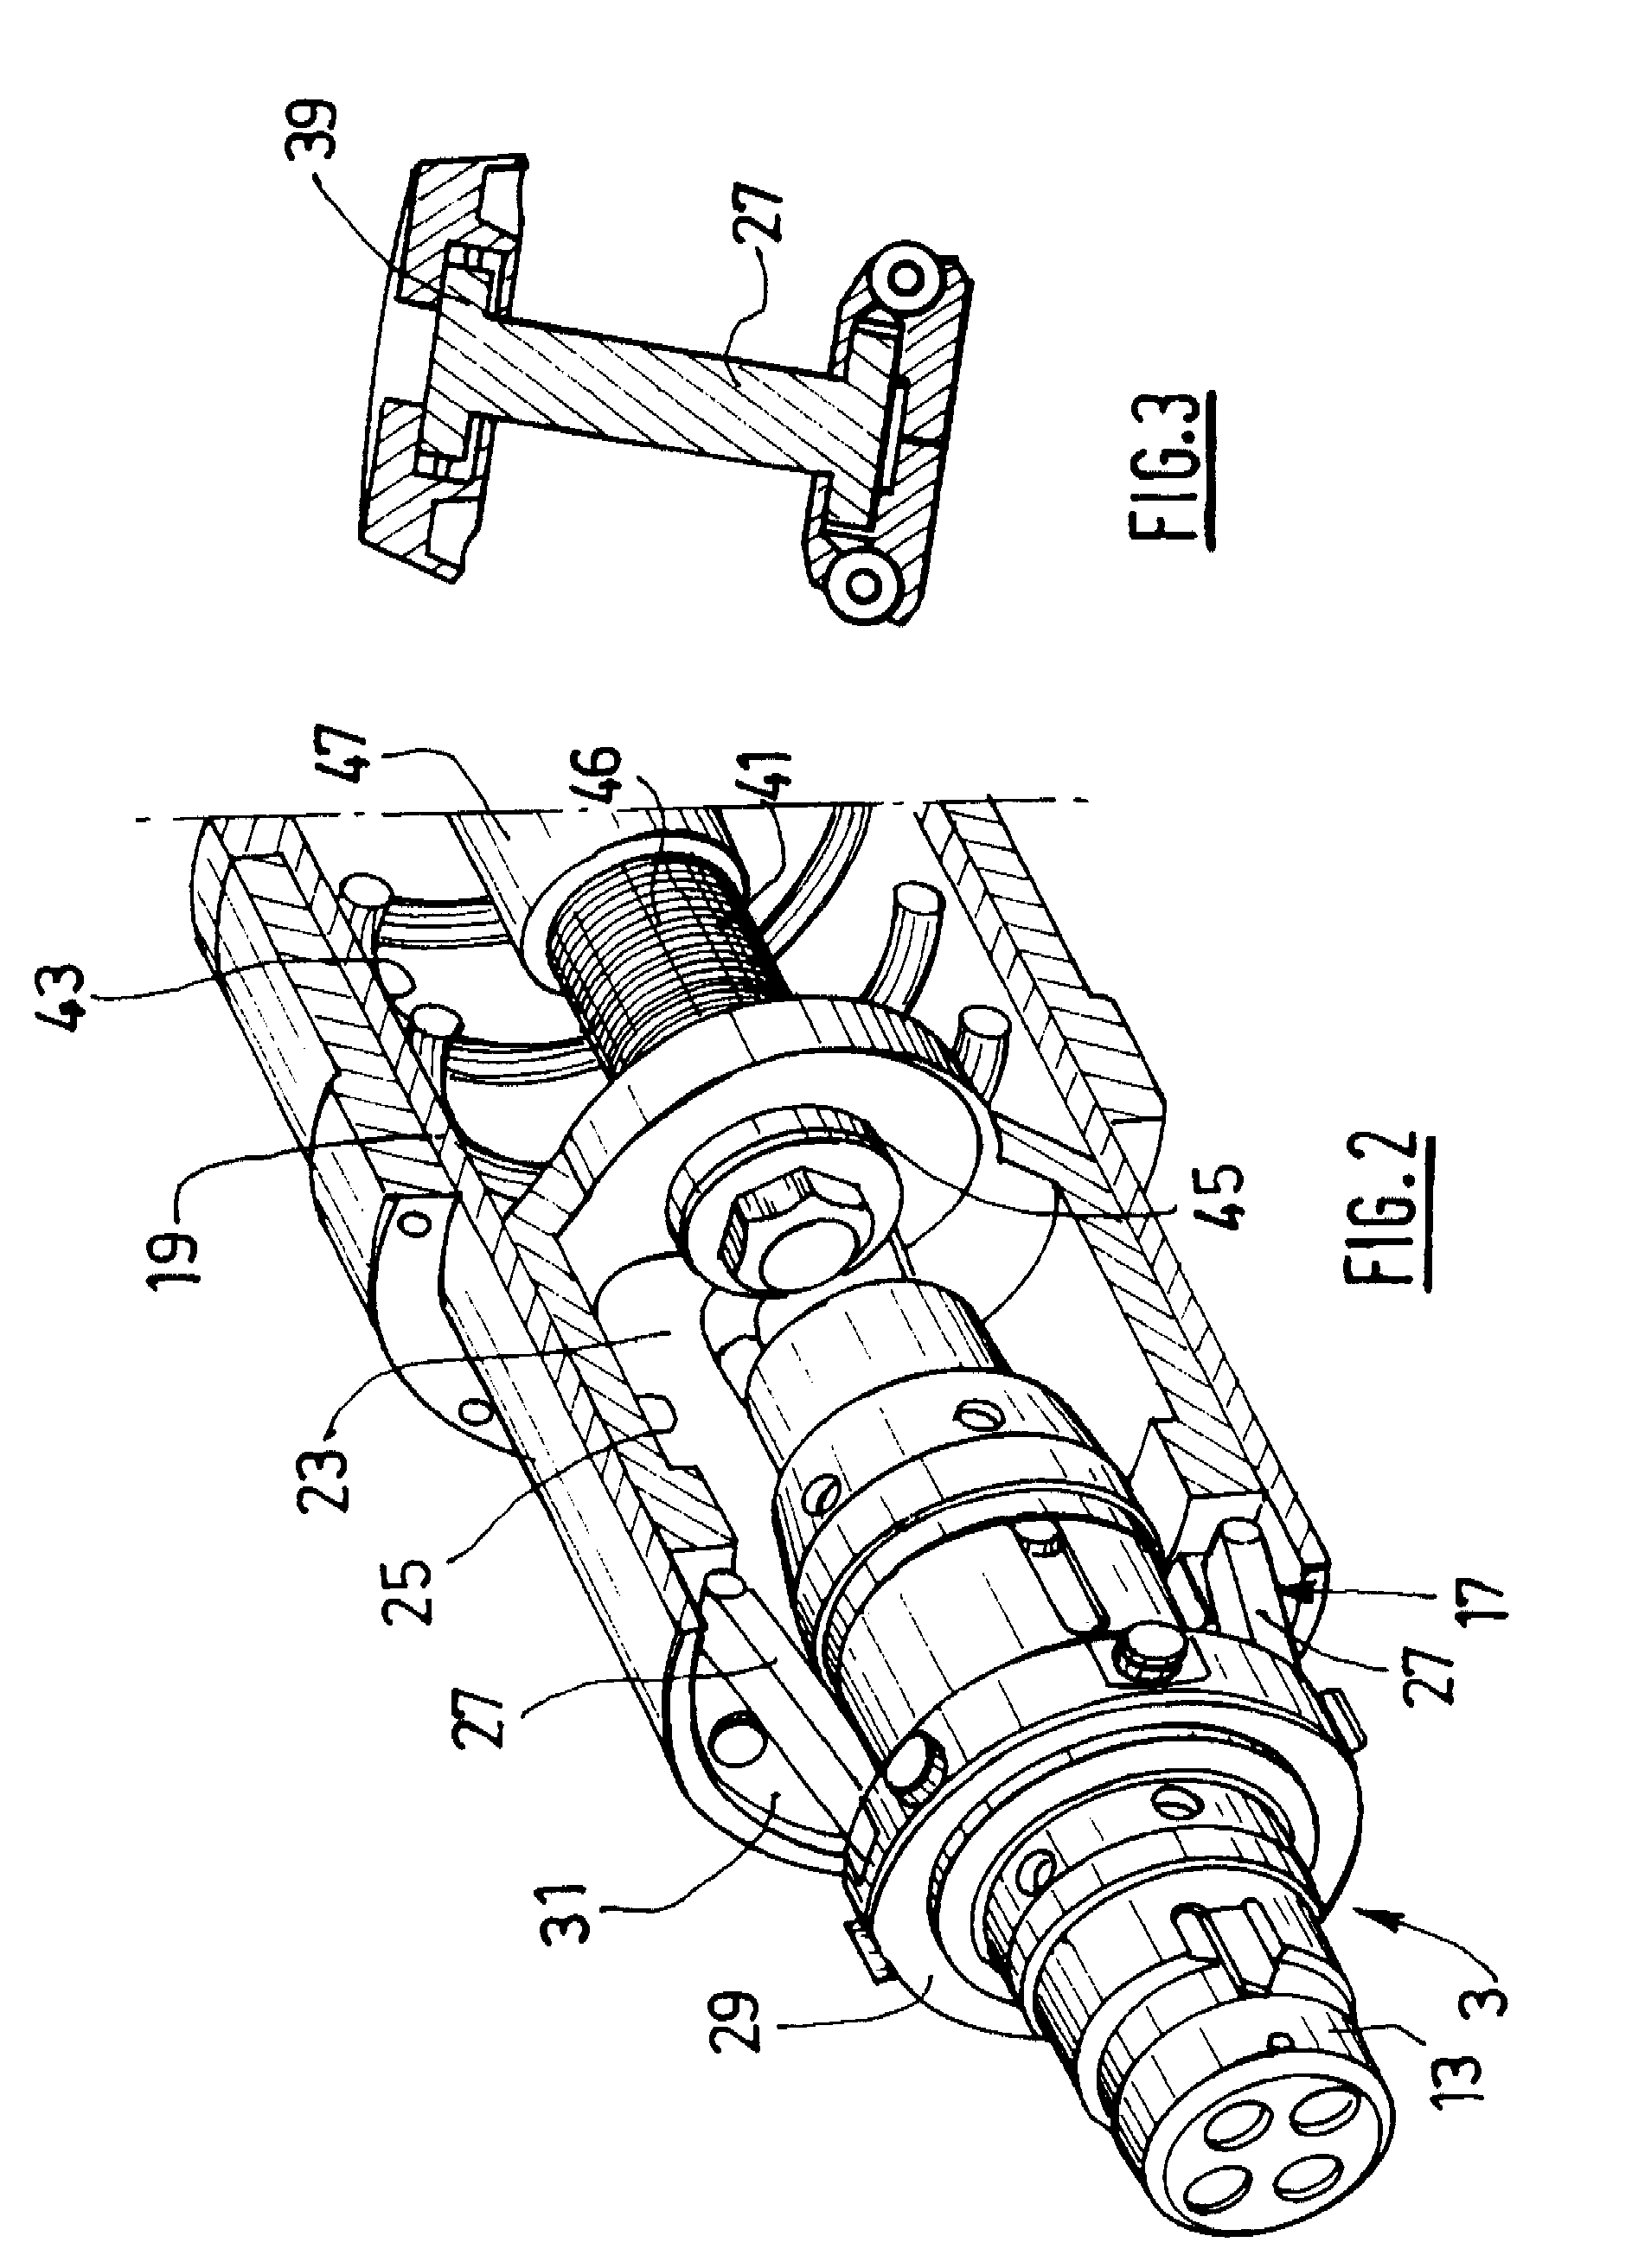 Electrical or optical or hydraulic connector that self-aligns the plug with respect to the base, particularly for offshore connections